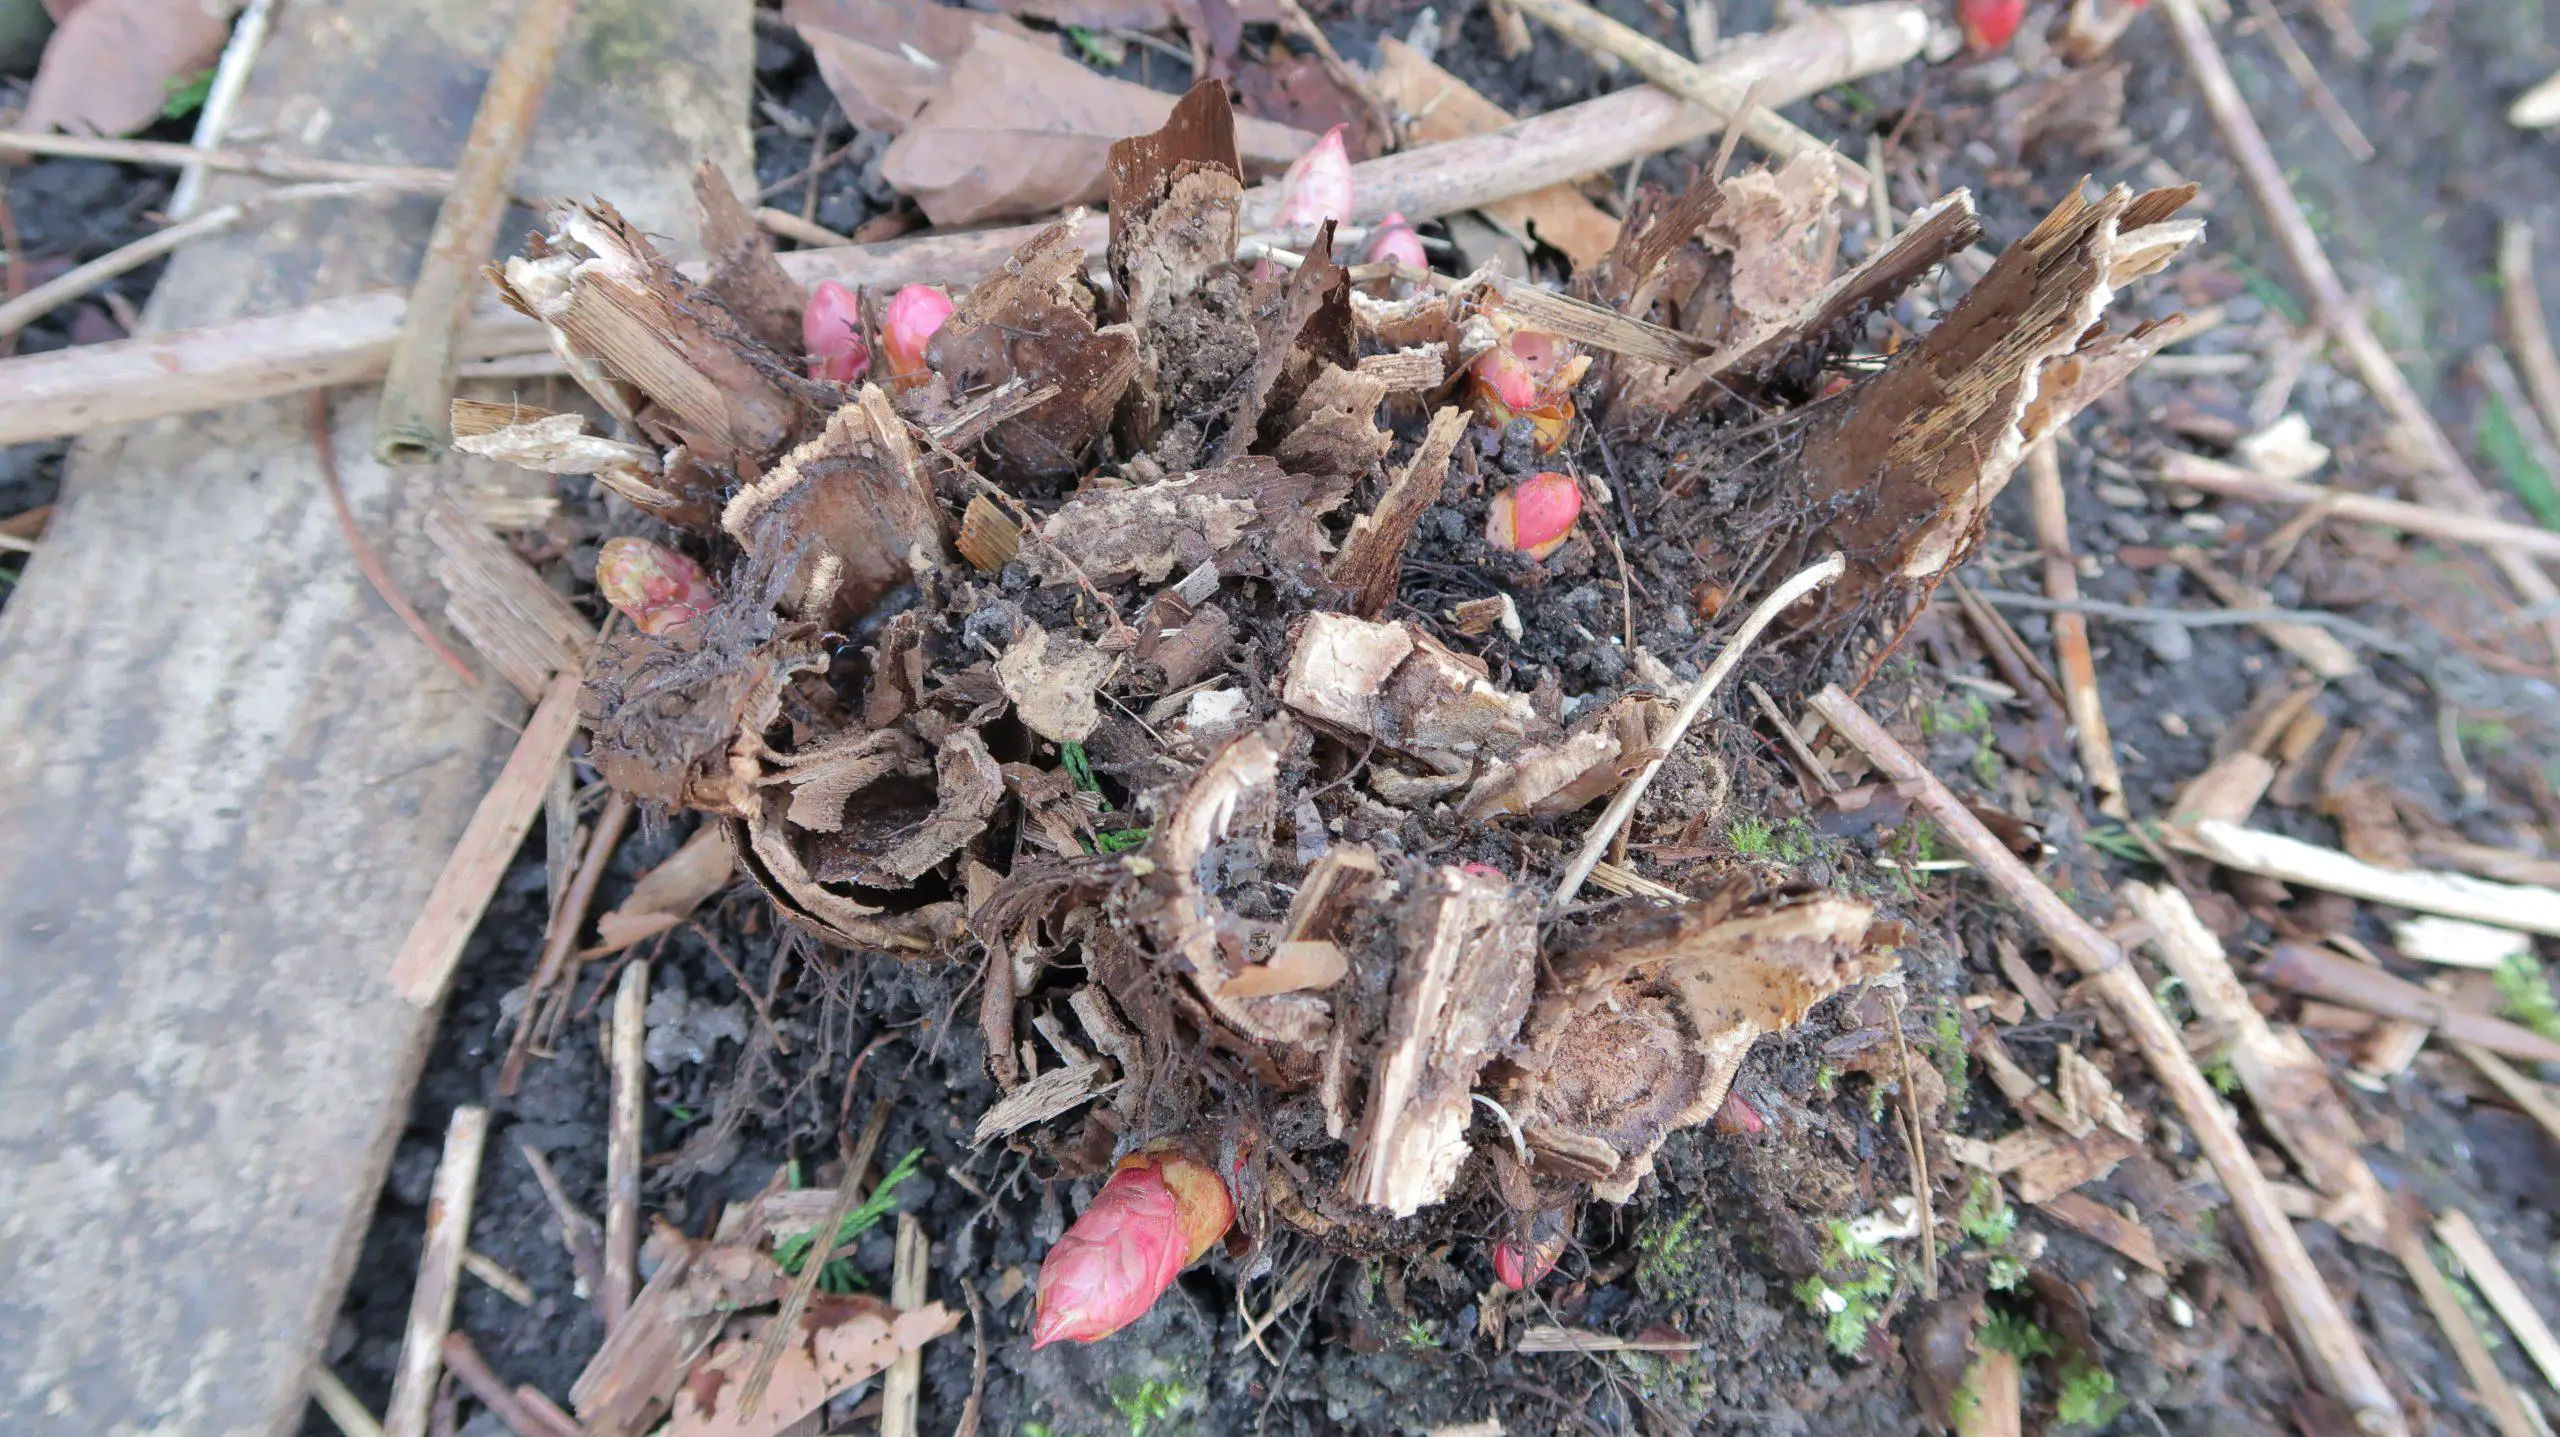 The erosion of soil is evident on this Japanese knotweed crown